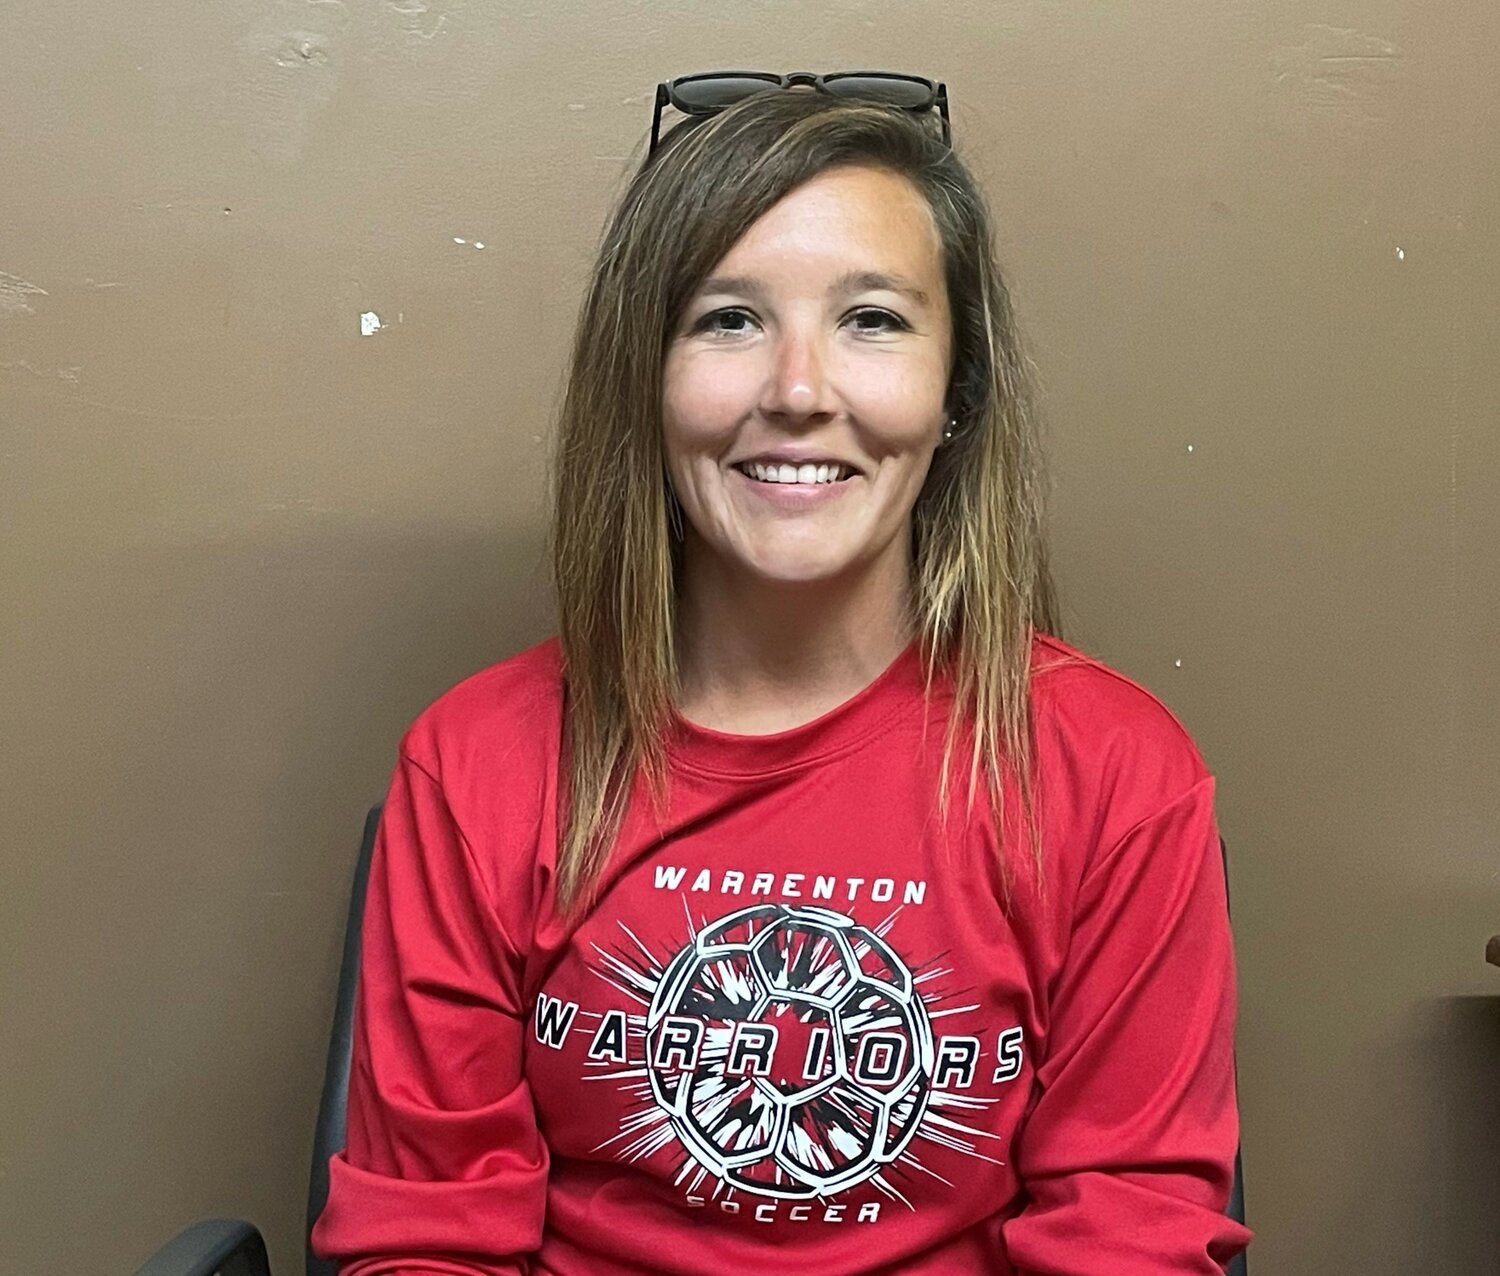 Courtney Nenninger was recently hired as the Warrenton head girls soccer coach after two years serving as an assistant coach.